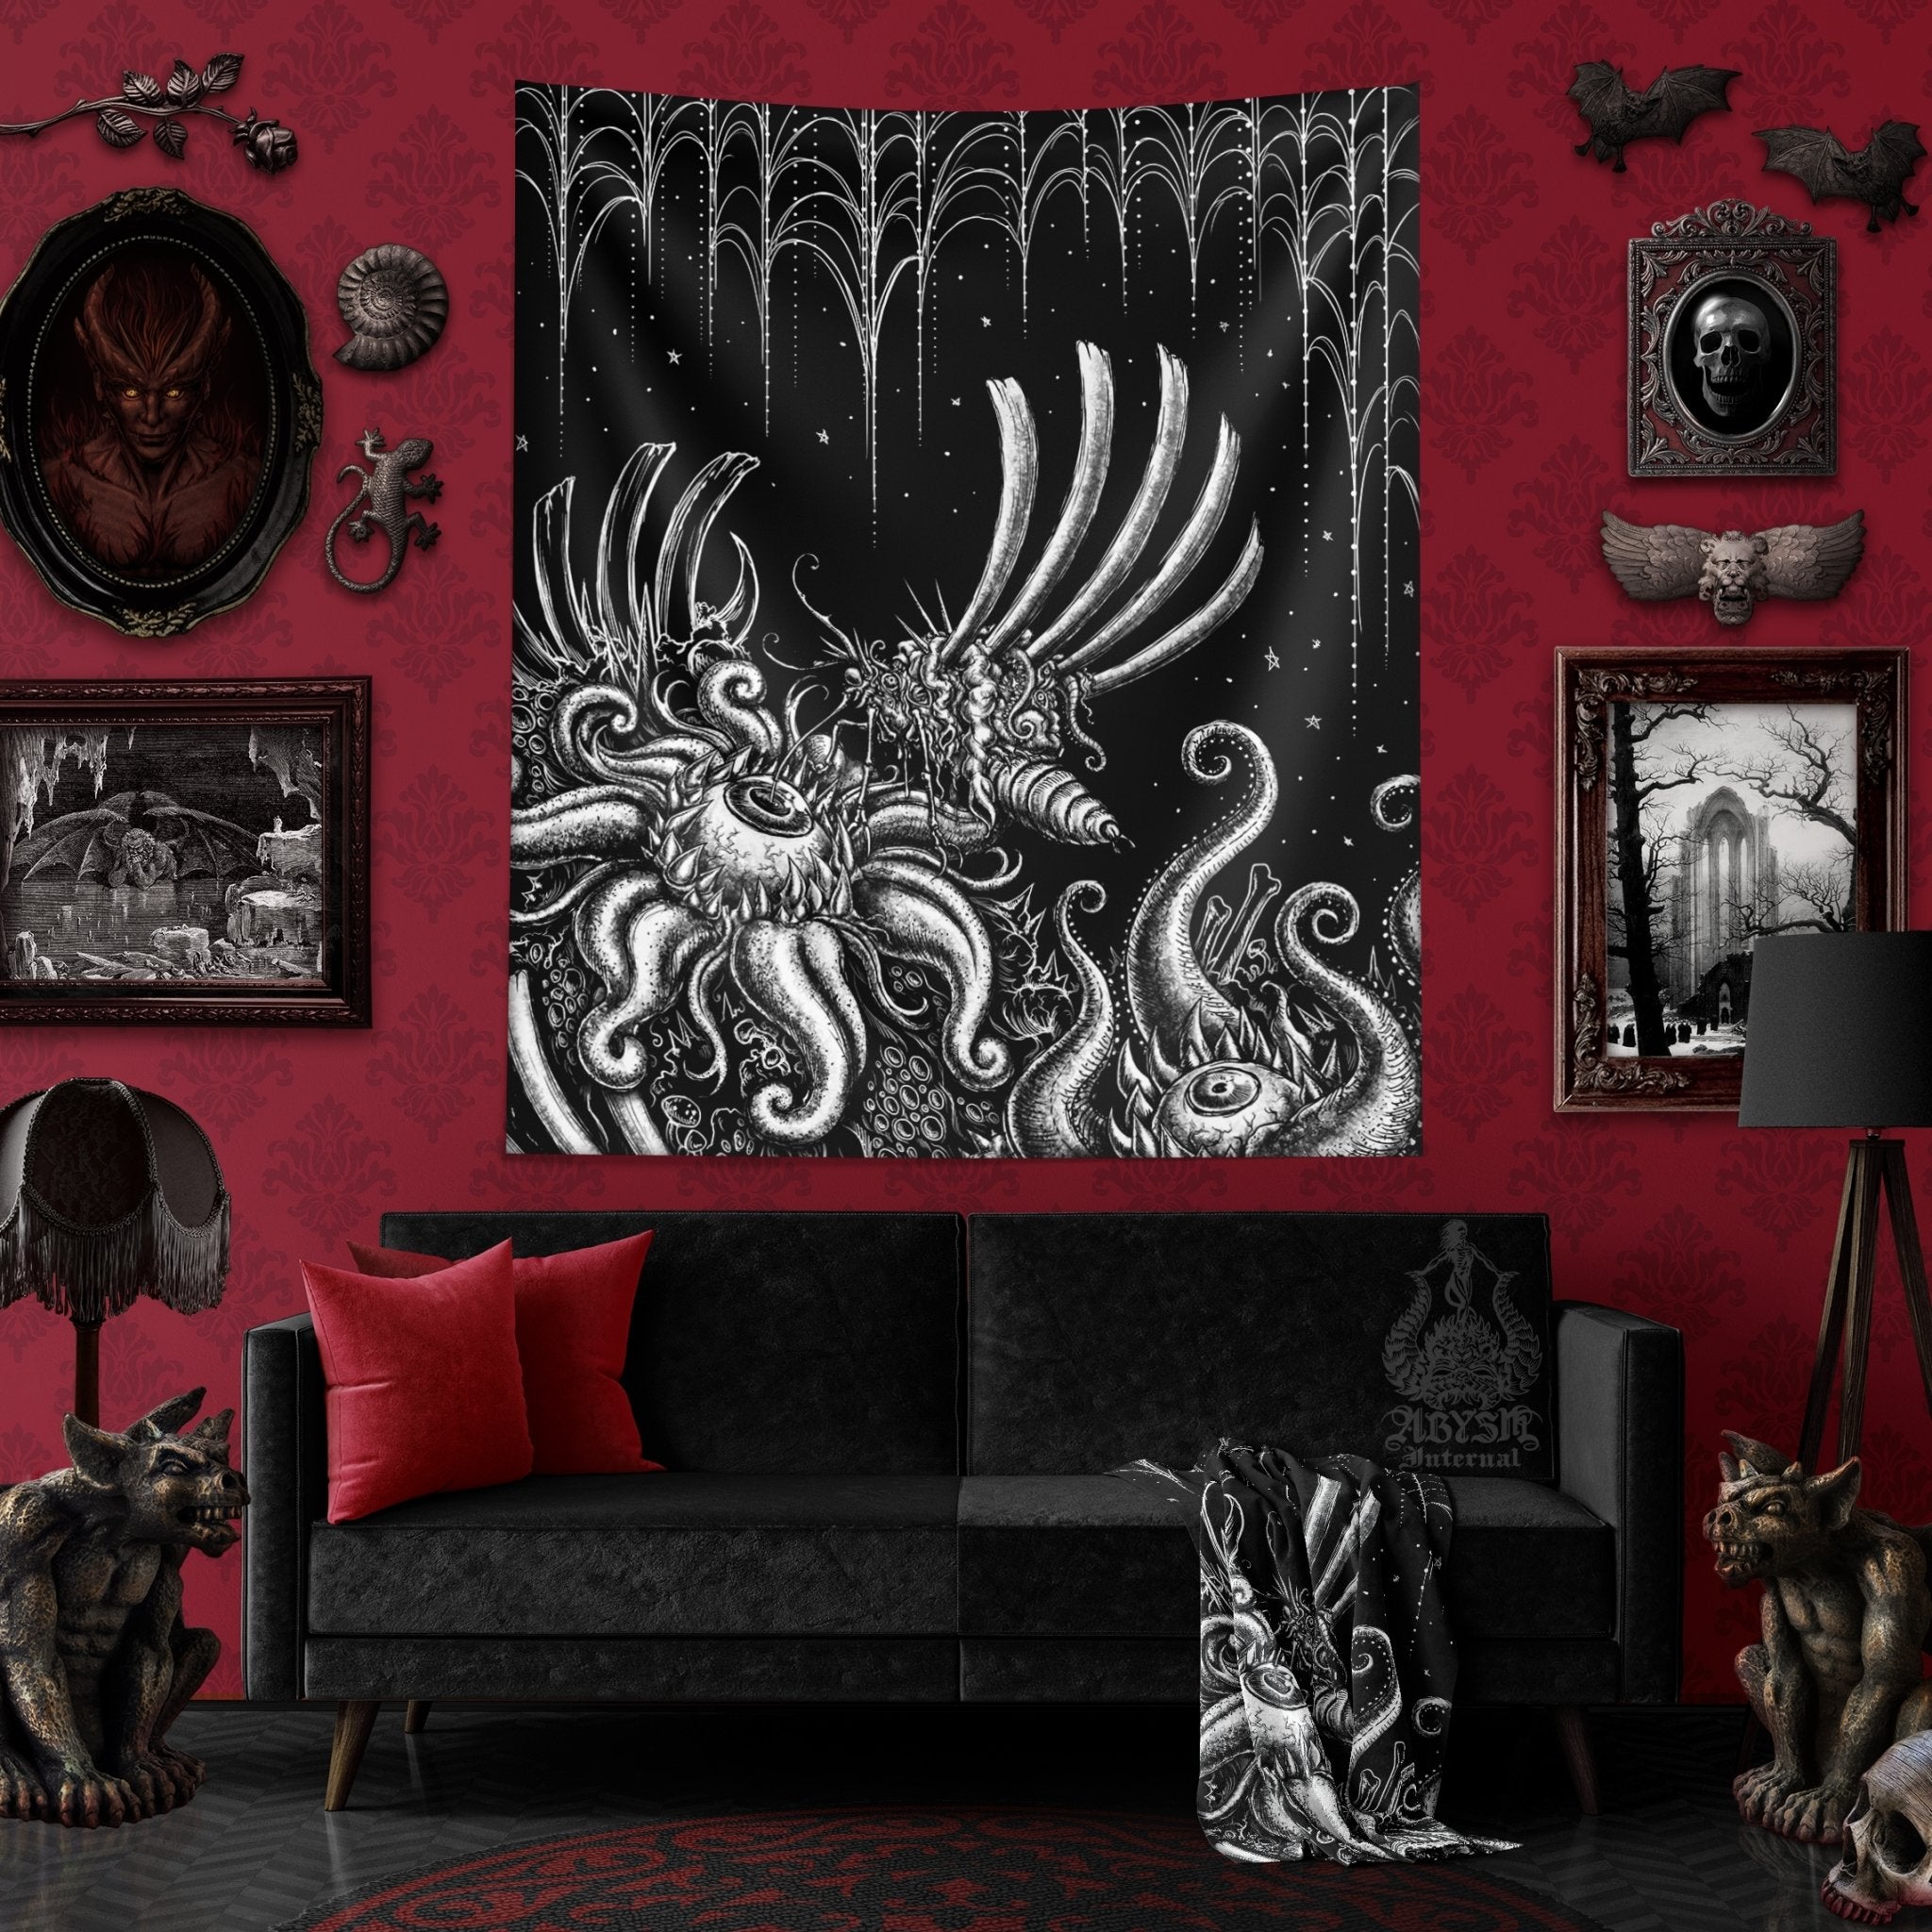 Horror Tapestry, Dark Wall Hanging, Goth Home Decor, Art Print - Gothic Hell, Bloodfly - Abysm Internal